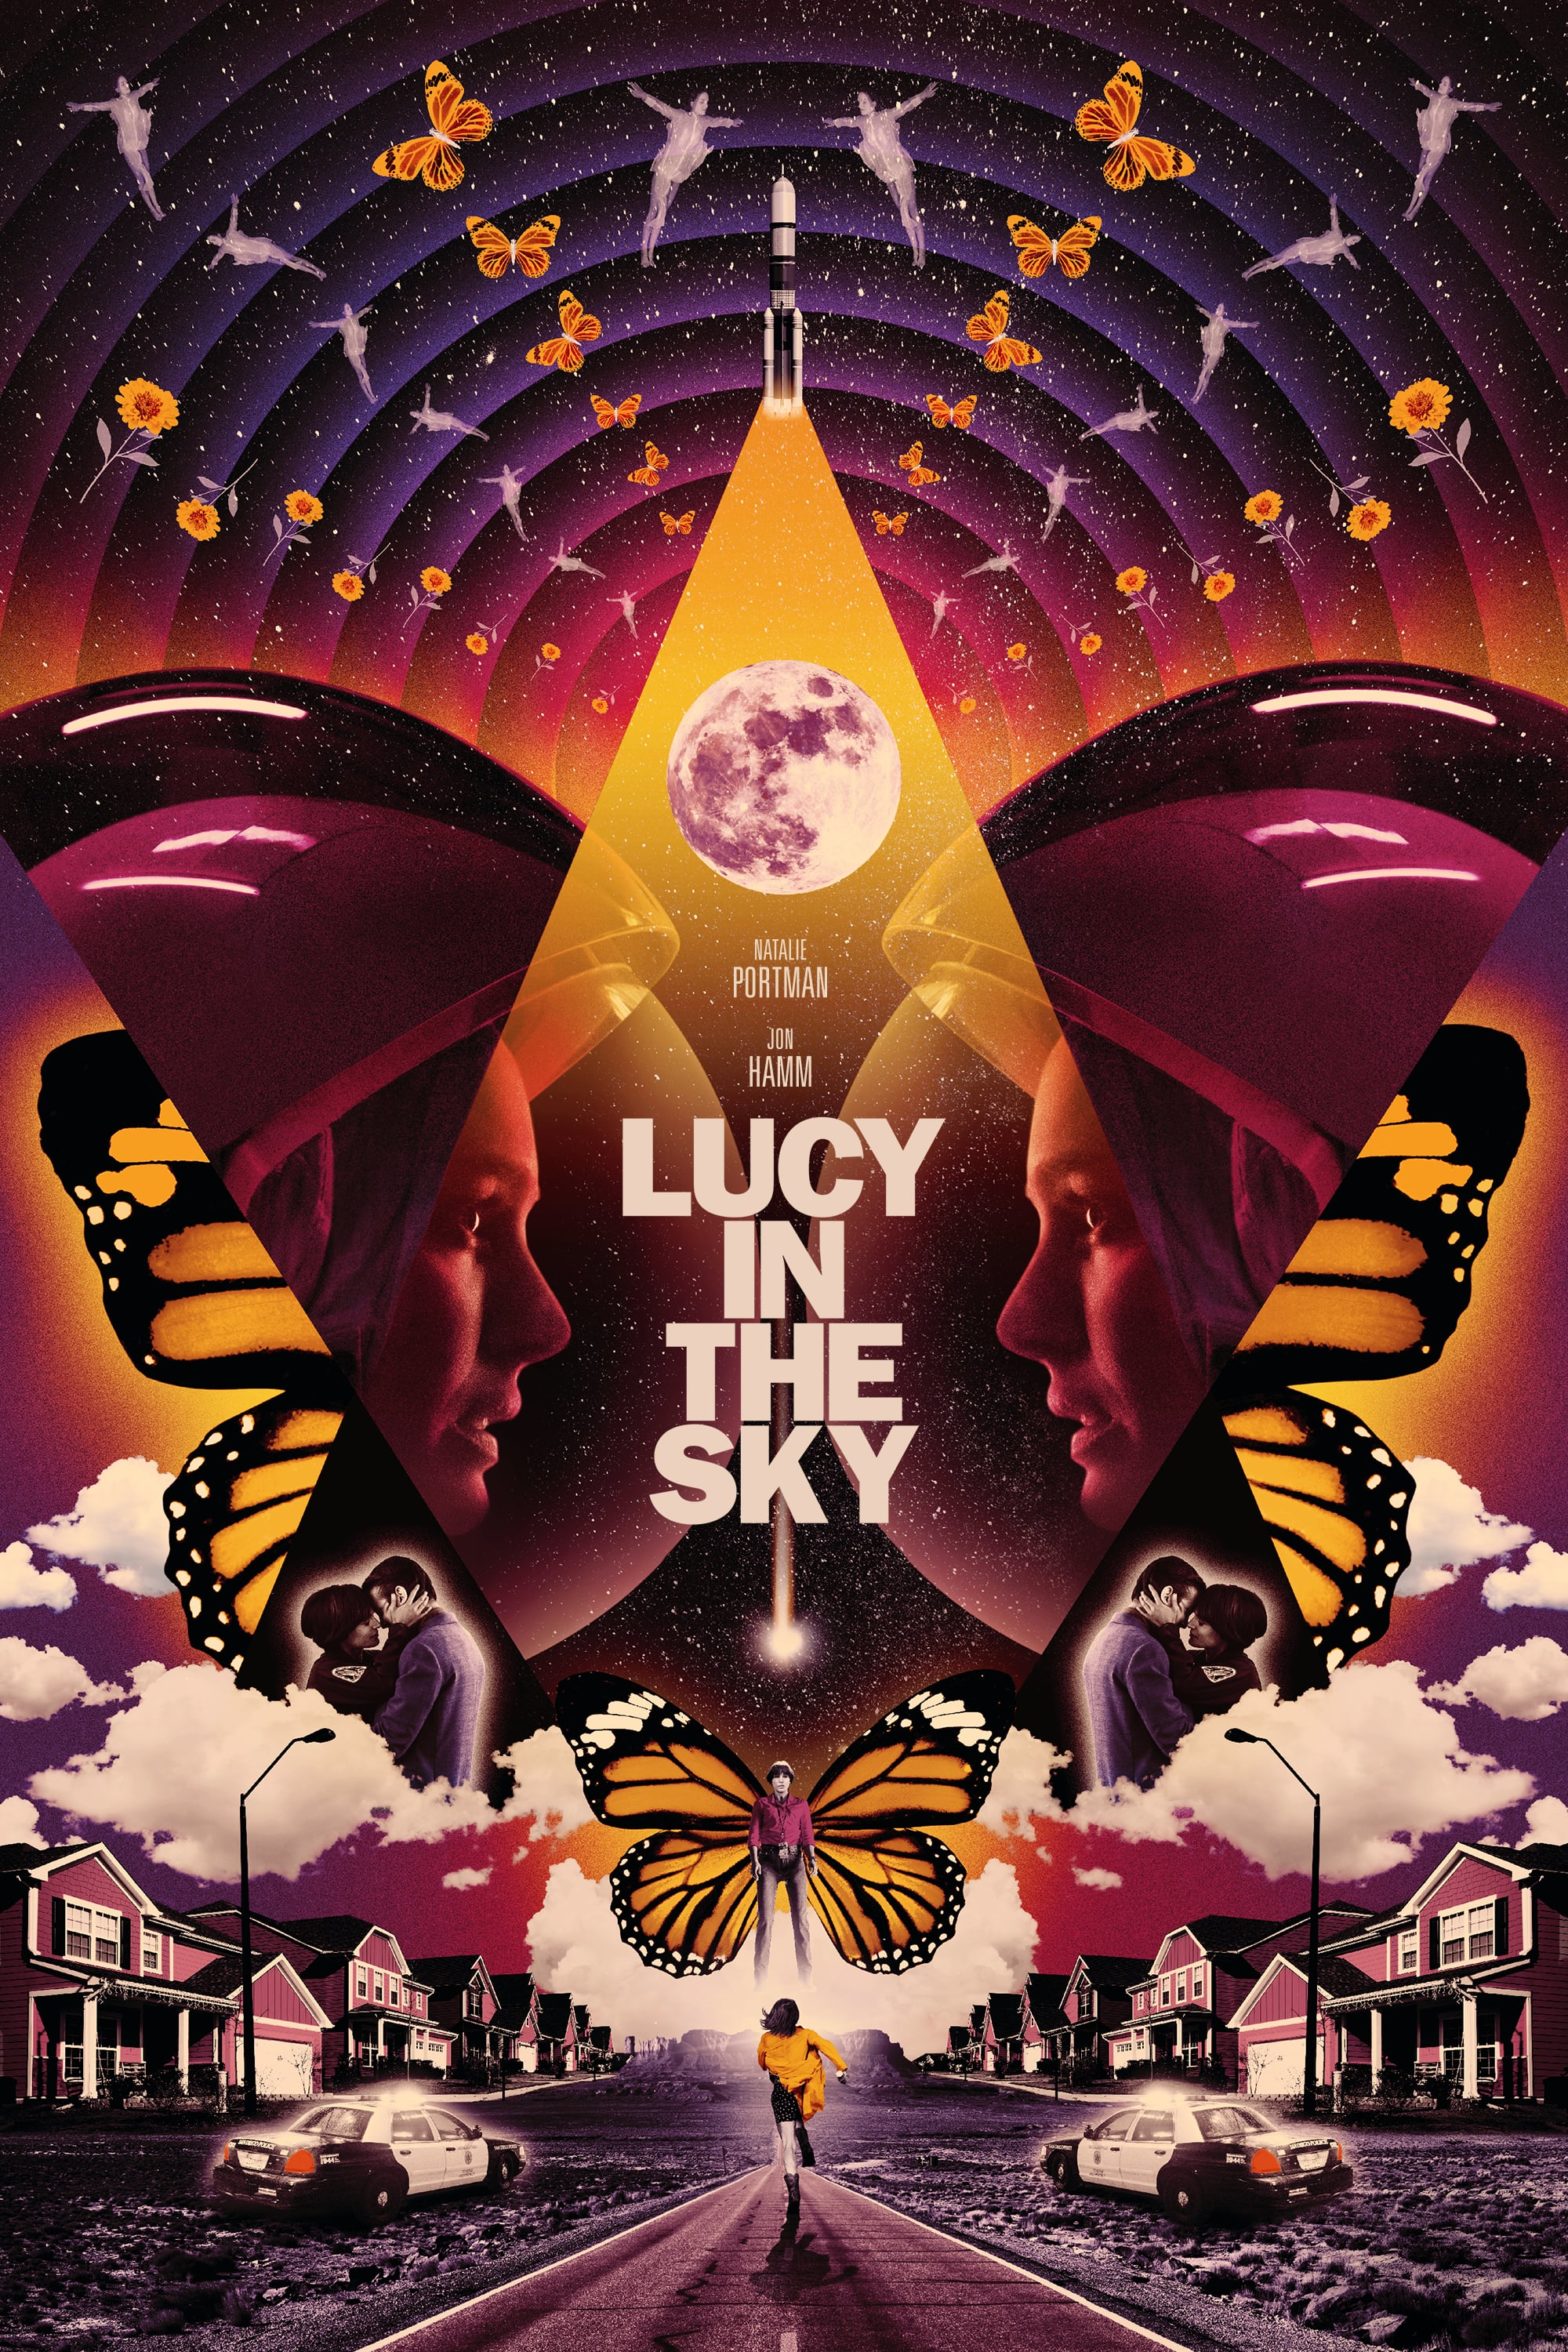 Poster for the movie "Lucy in the Sky"